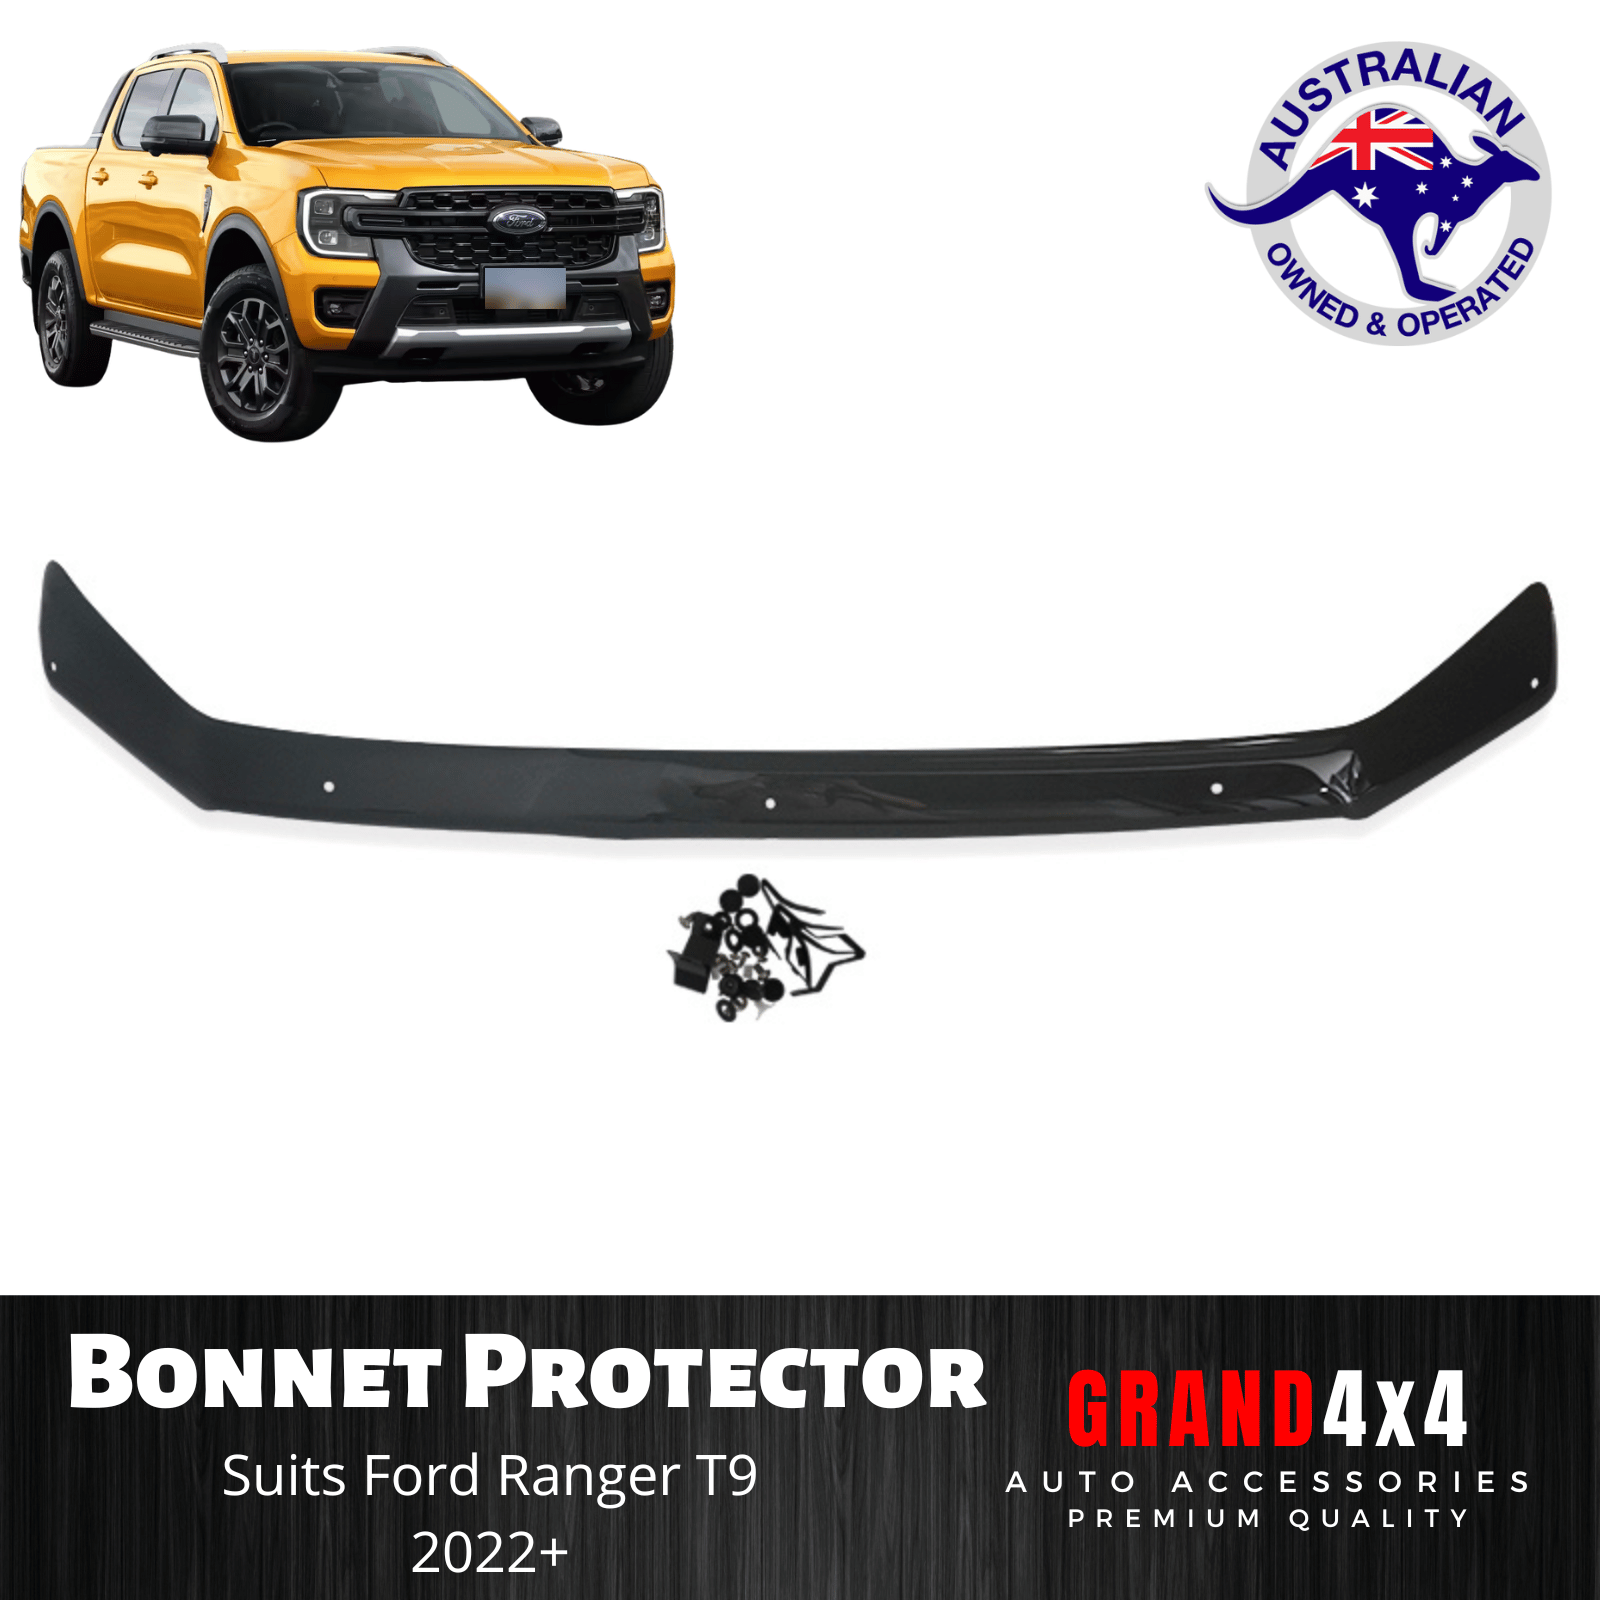 Bonnet Protector Guard Black to suit Ford Ranger T9 2022 2023 All Models -  GRAND4x4